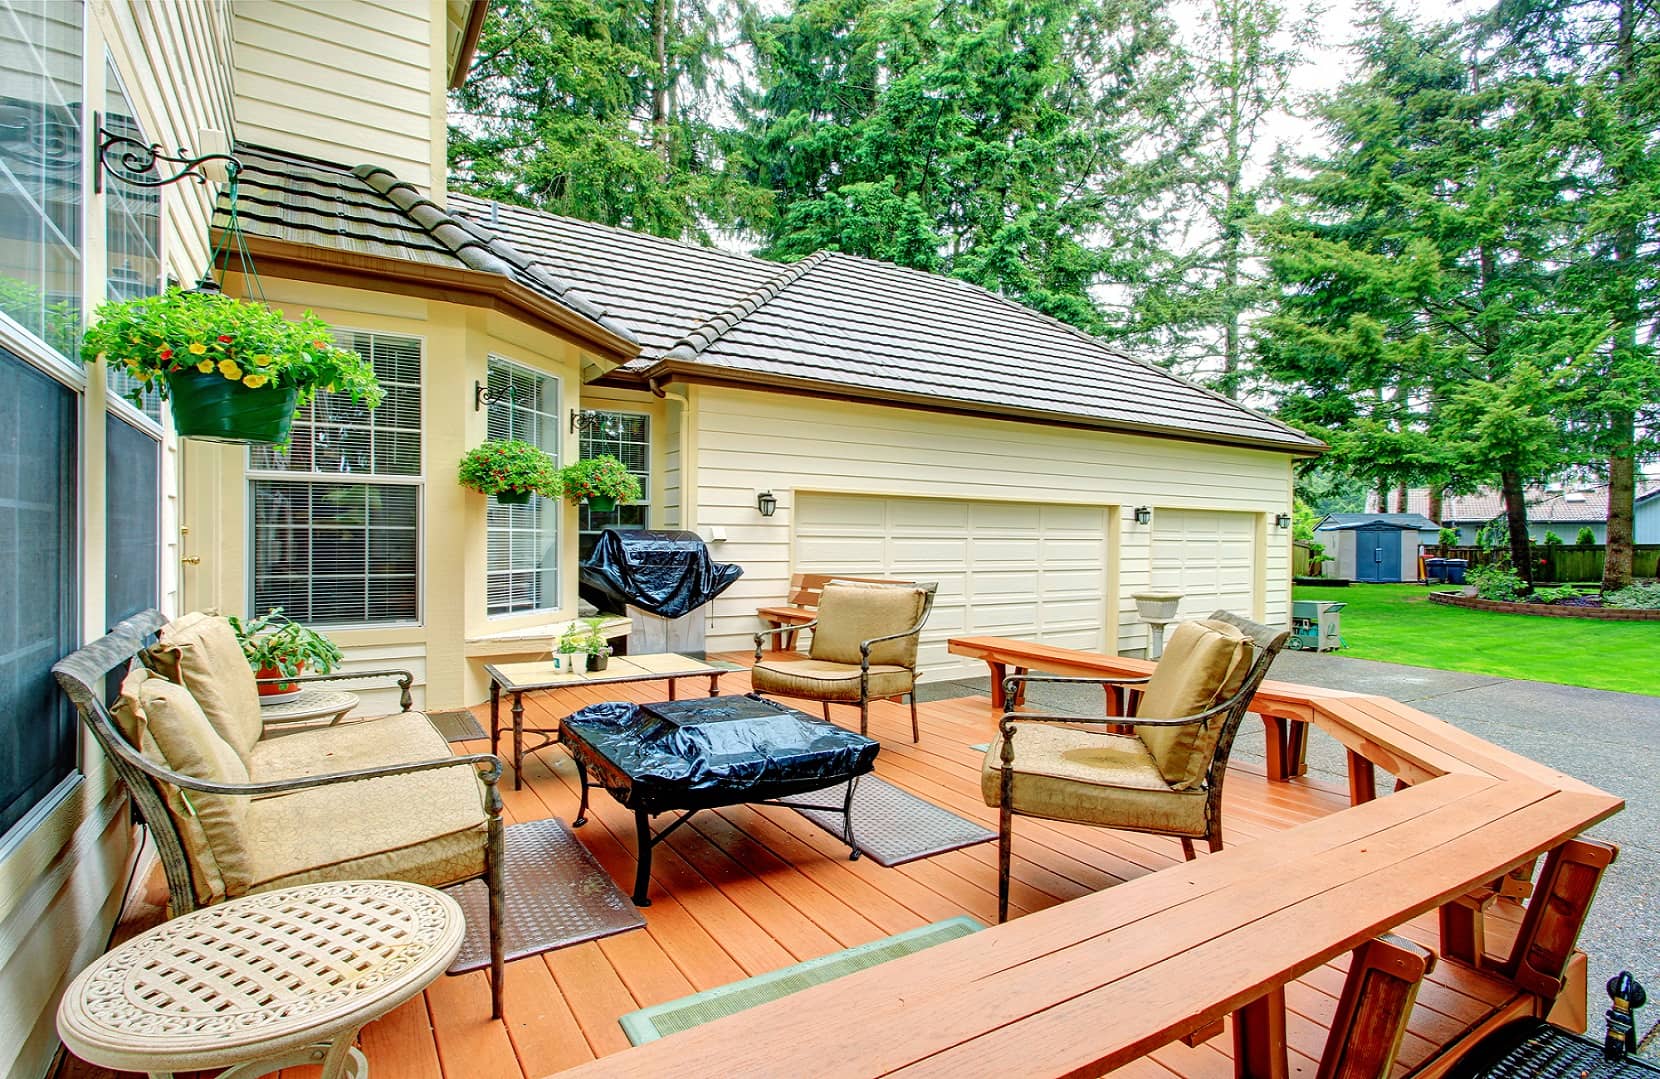 Tips For Taking Care Of A Wood Deck - Vancouver Custom Homes -Fazzolari Construction